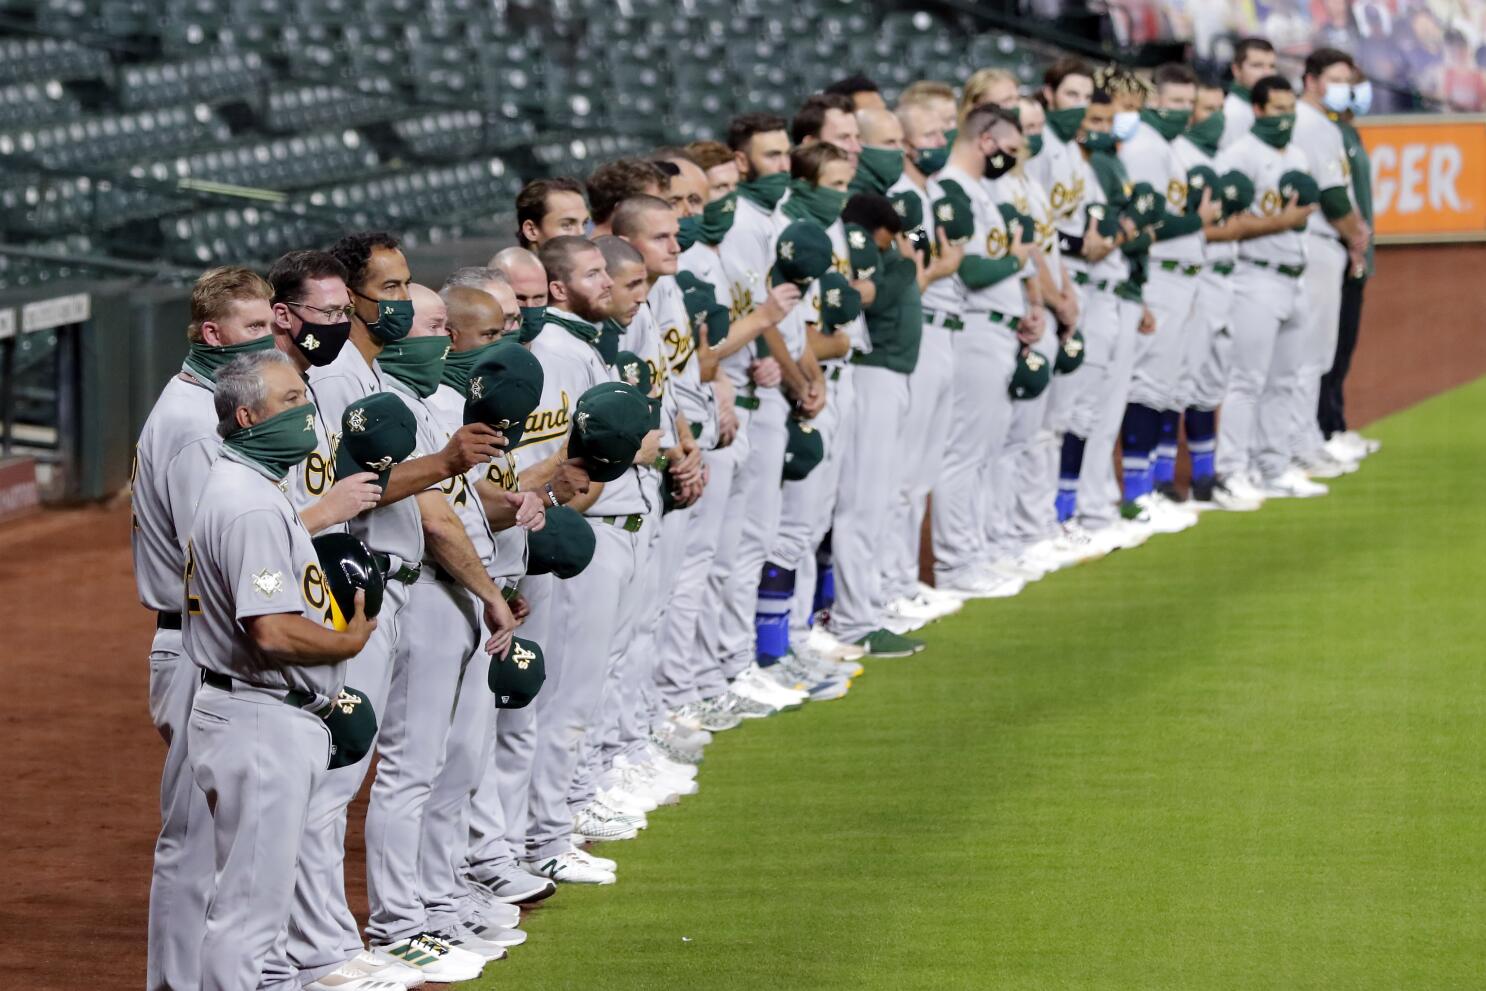 A's, Astros walk off field in protest; game is postponed - Los Angeles Times